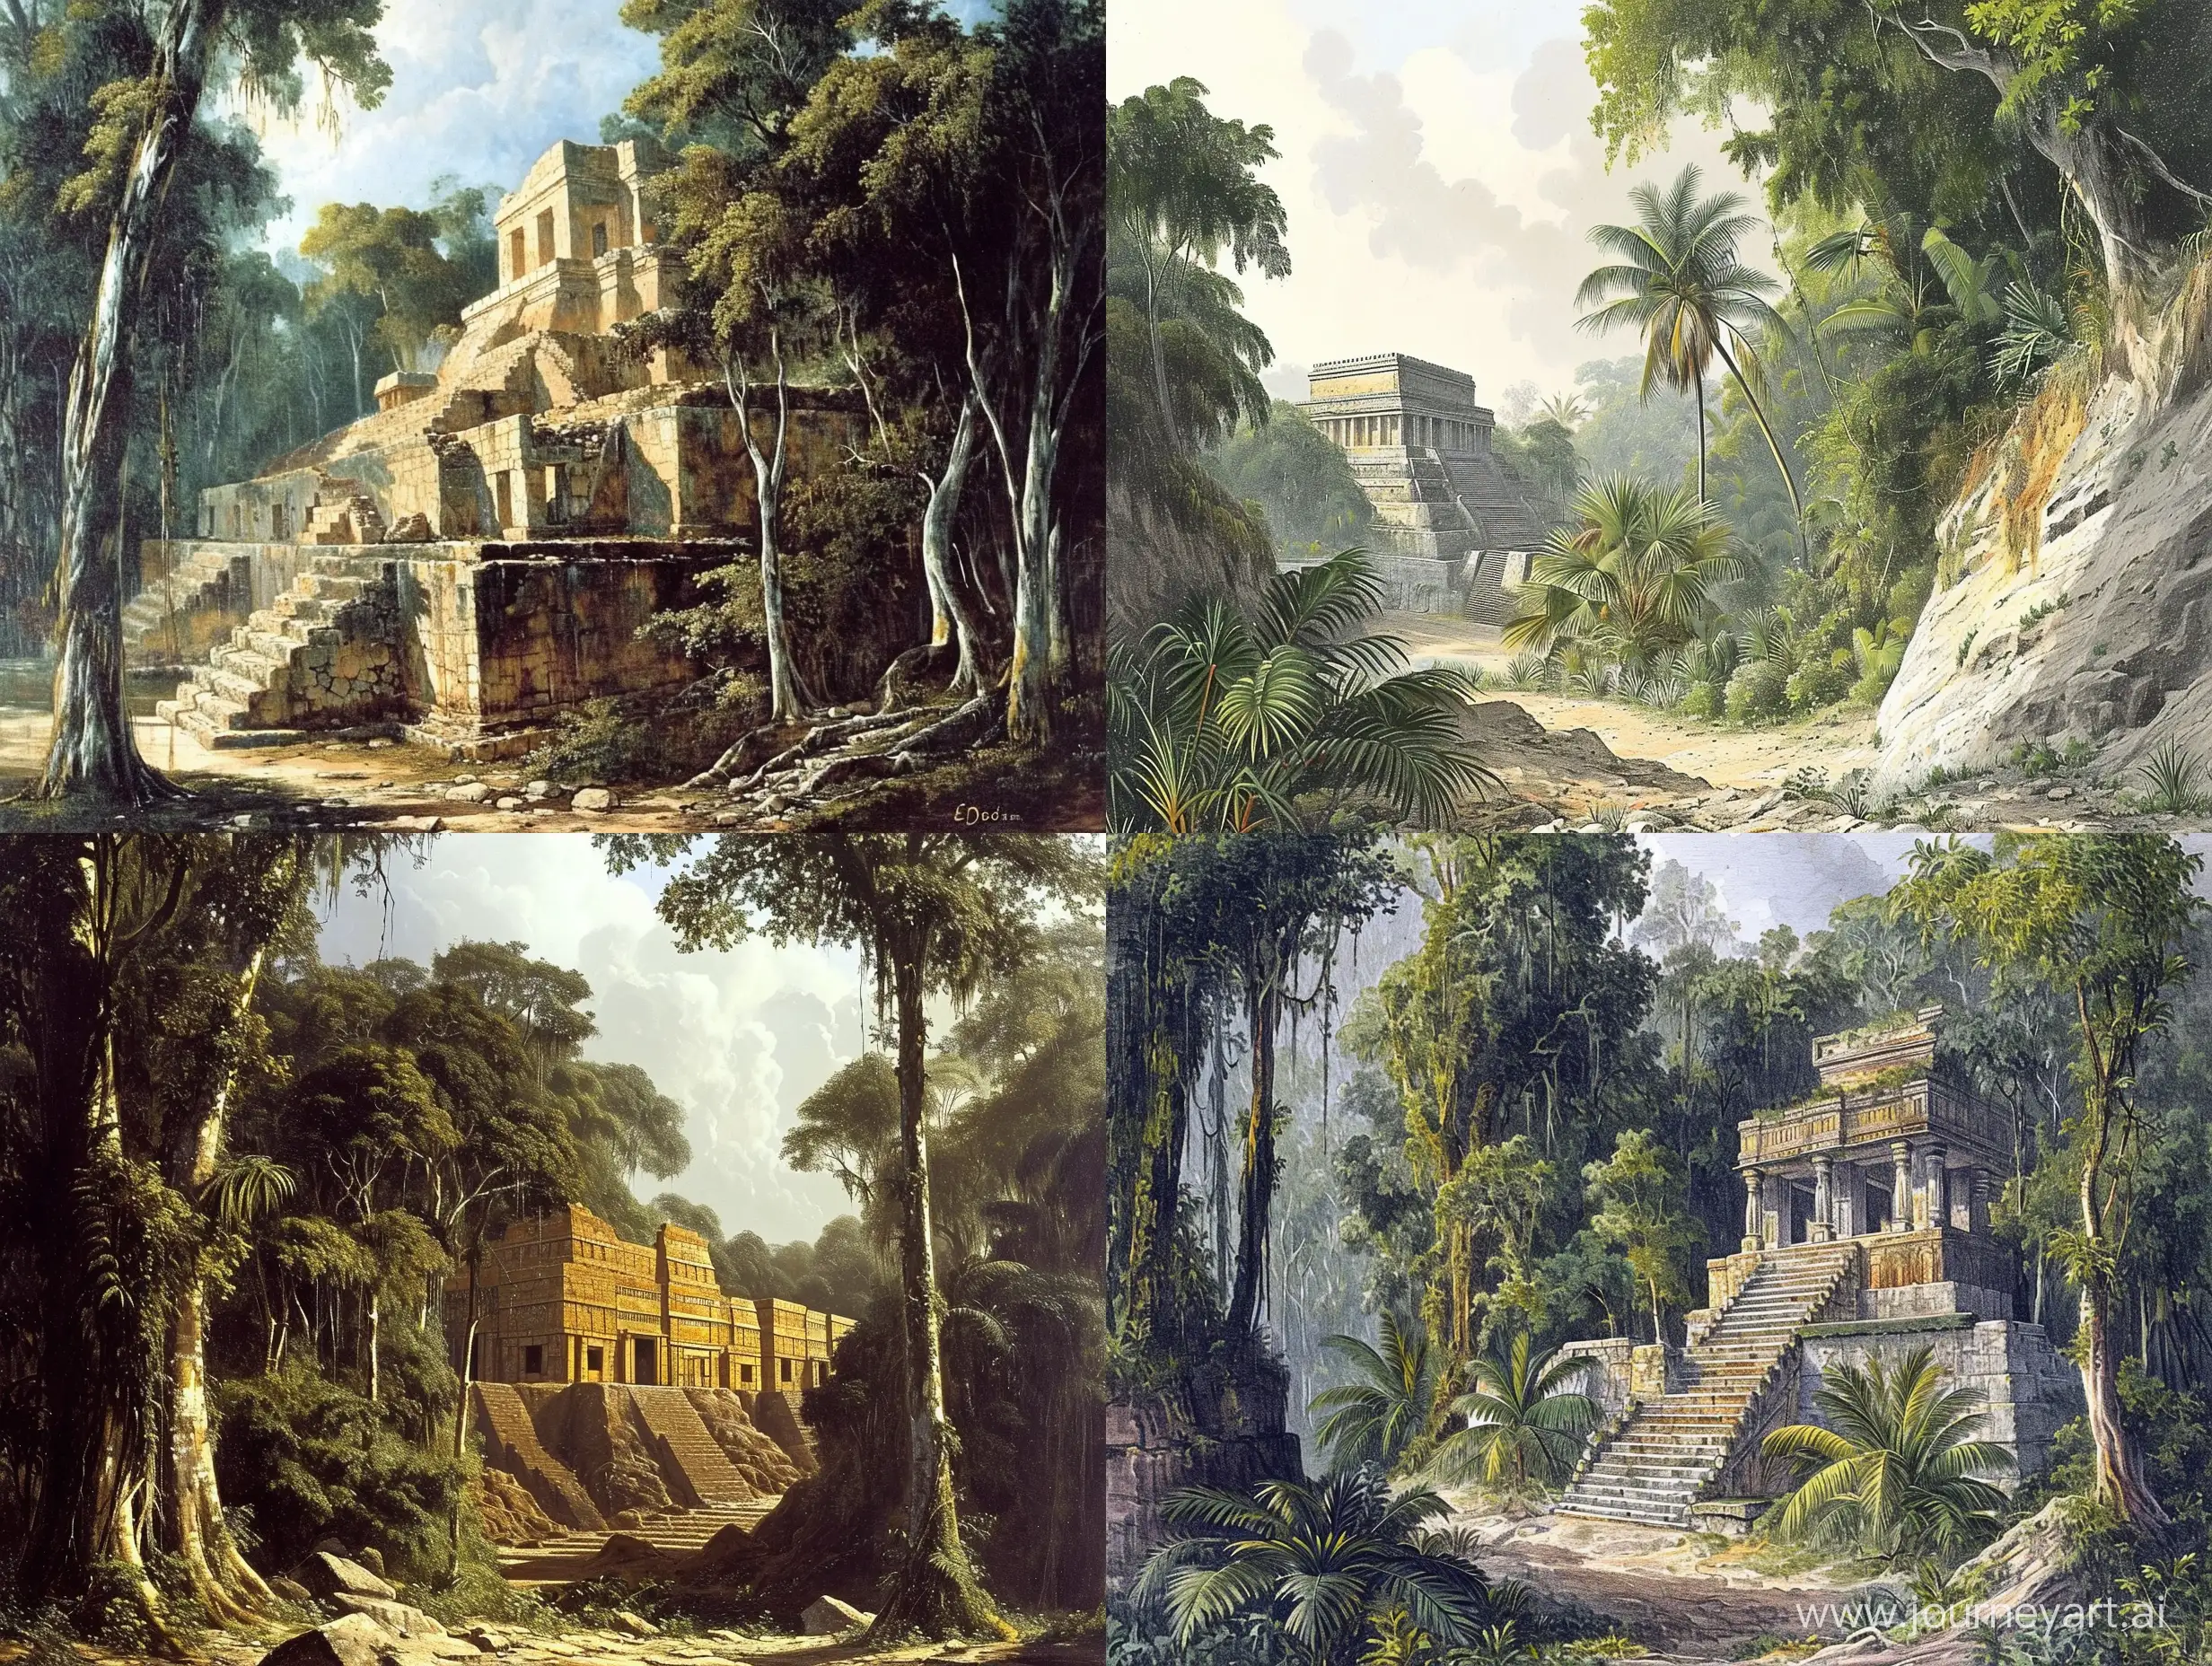 The Lost City of El Dorado in the Amazon jungle painted by Jean-Léon Gérôme. In color.  detailed. 

